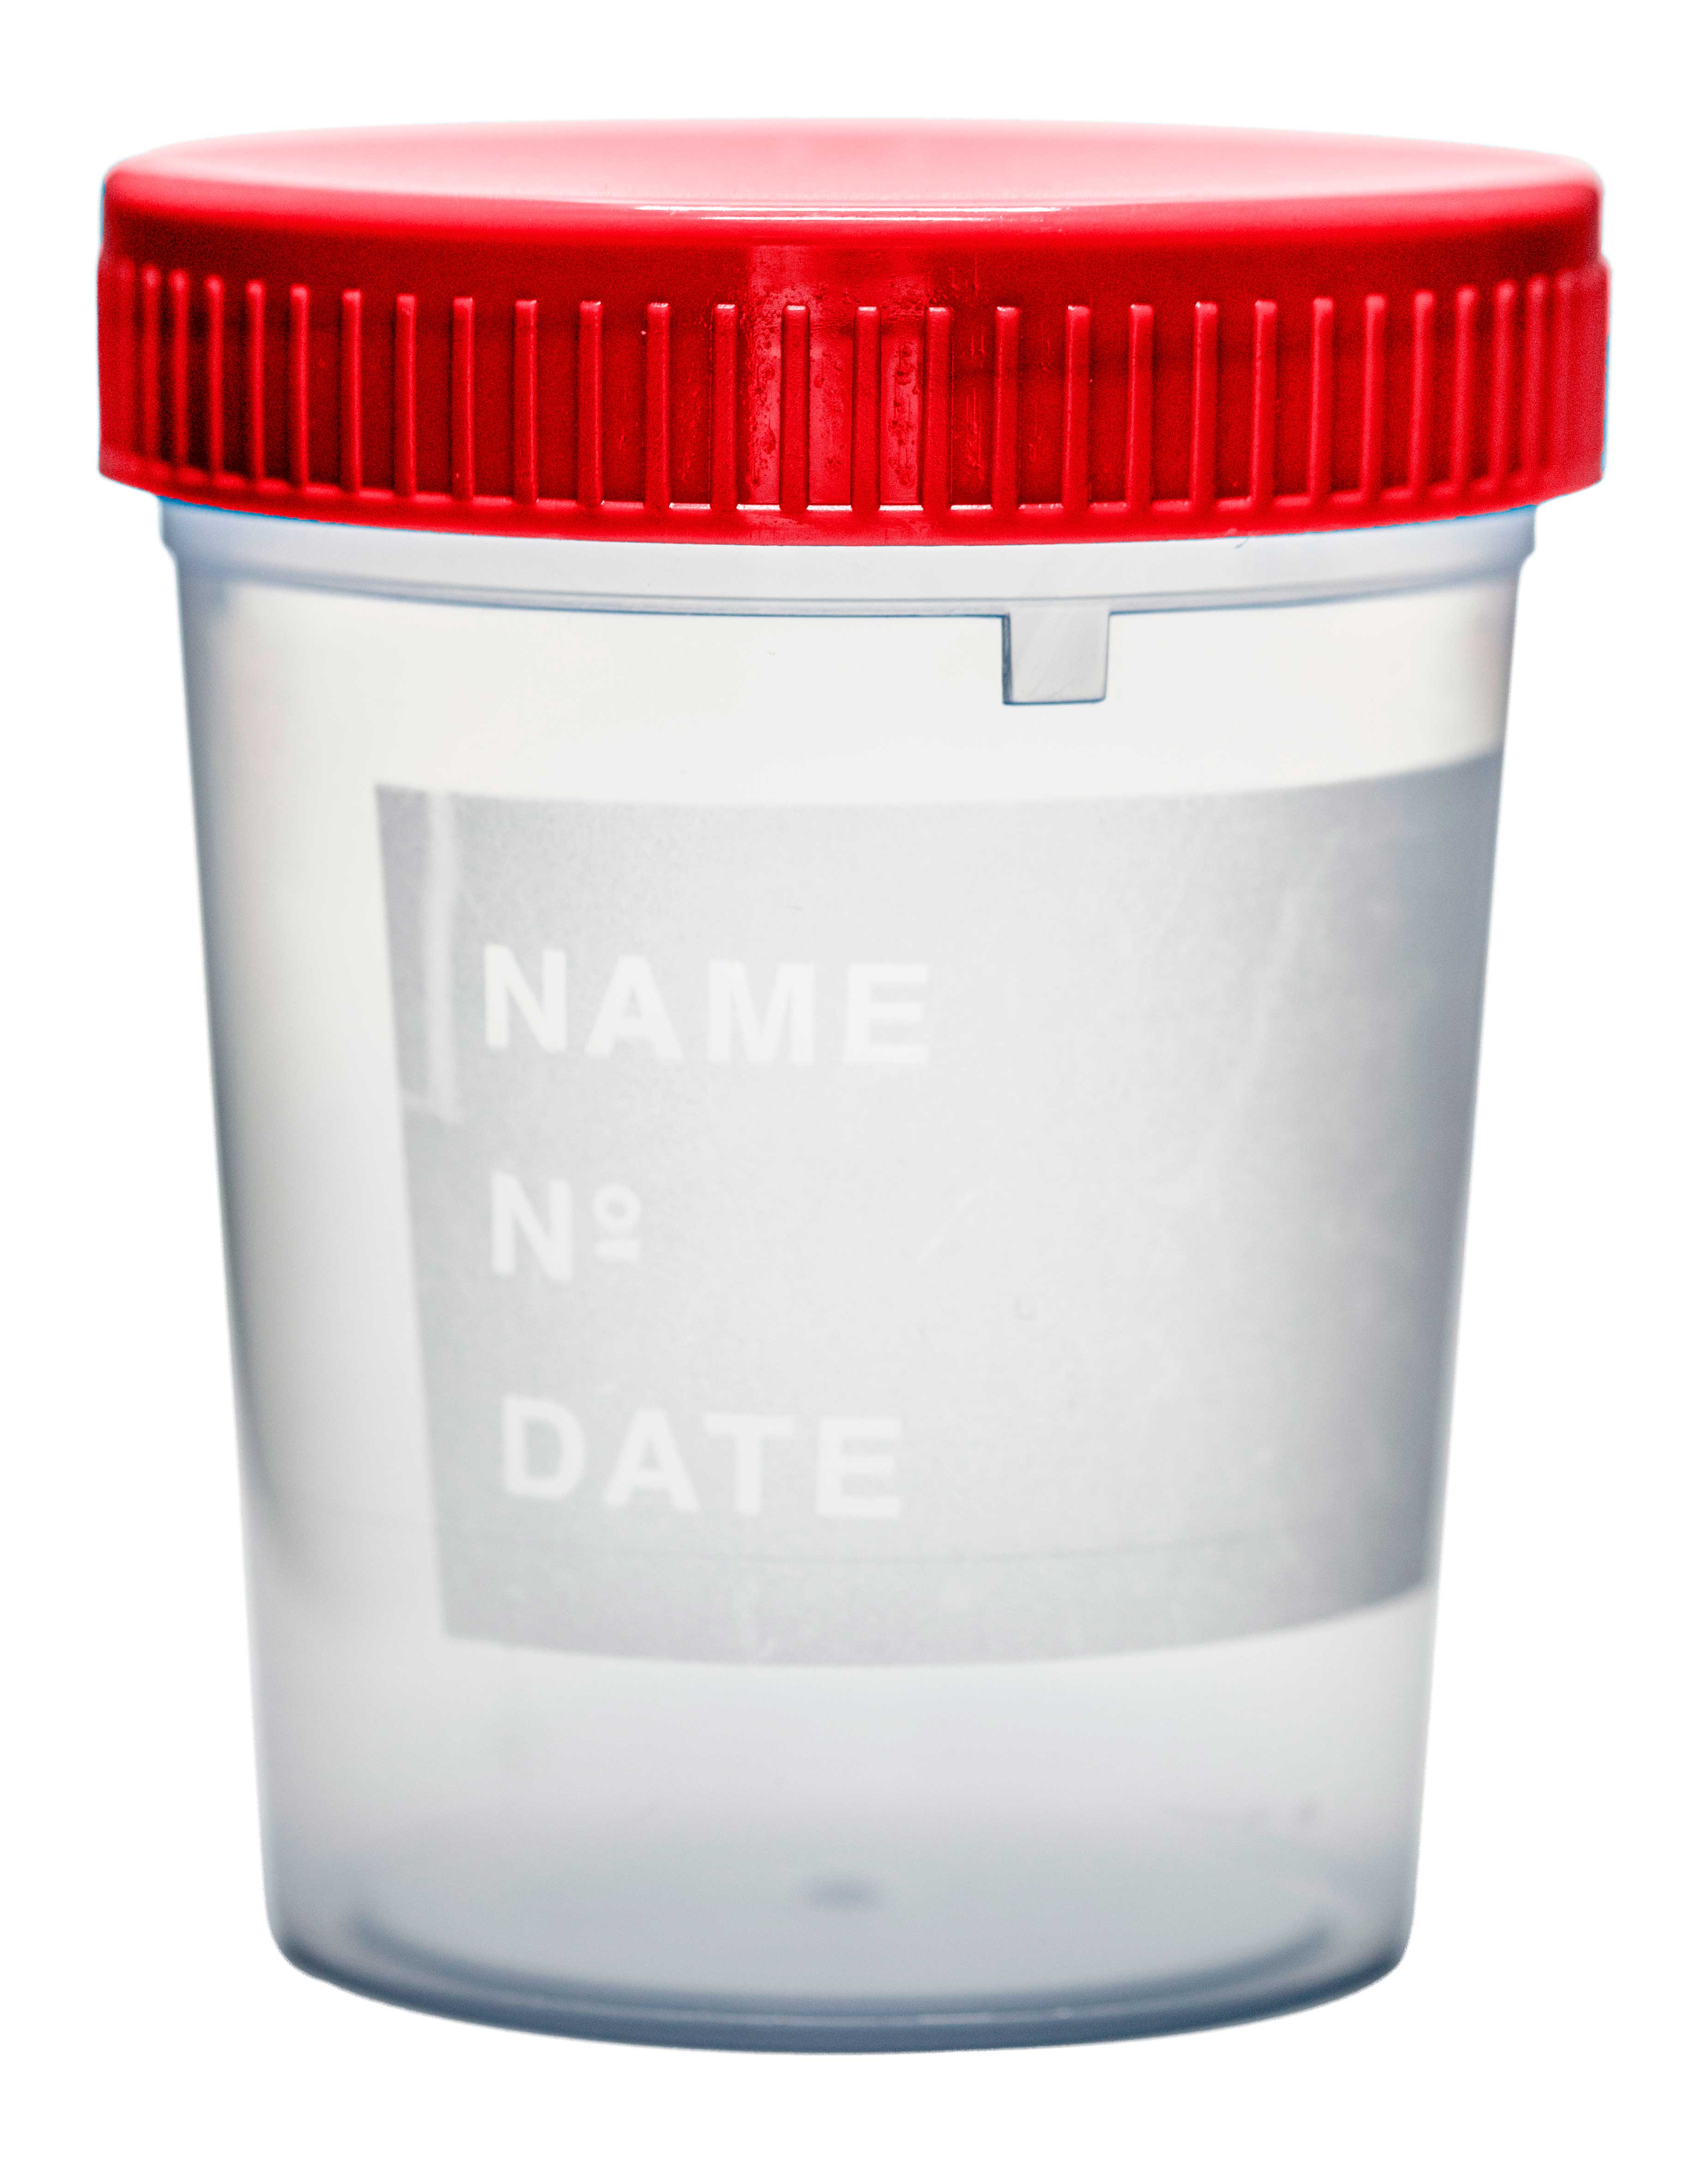 Urine container sterile graduated. Individually wrapped. Vol: 150 ml.  Measure:  up to 100ml. Cap color: Red. Material: PP. Writing surface: Yes. Dim: 58 x 72 mm. Graduation marks at (mL): 20, 40, 60, 80, 100.